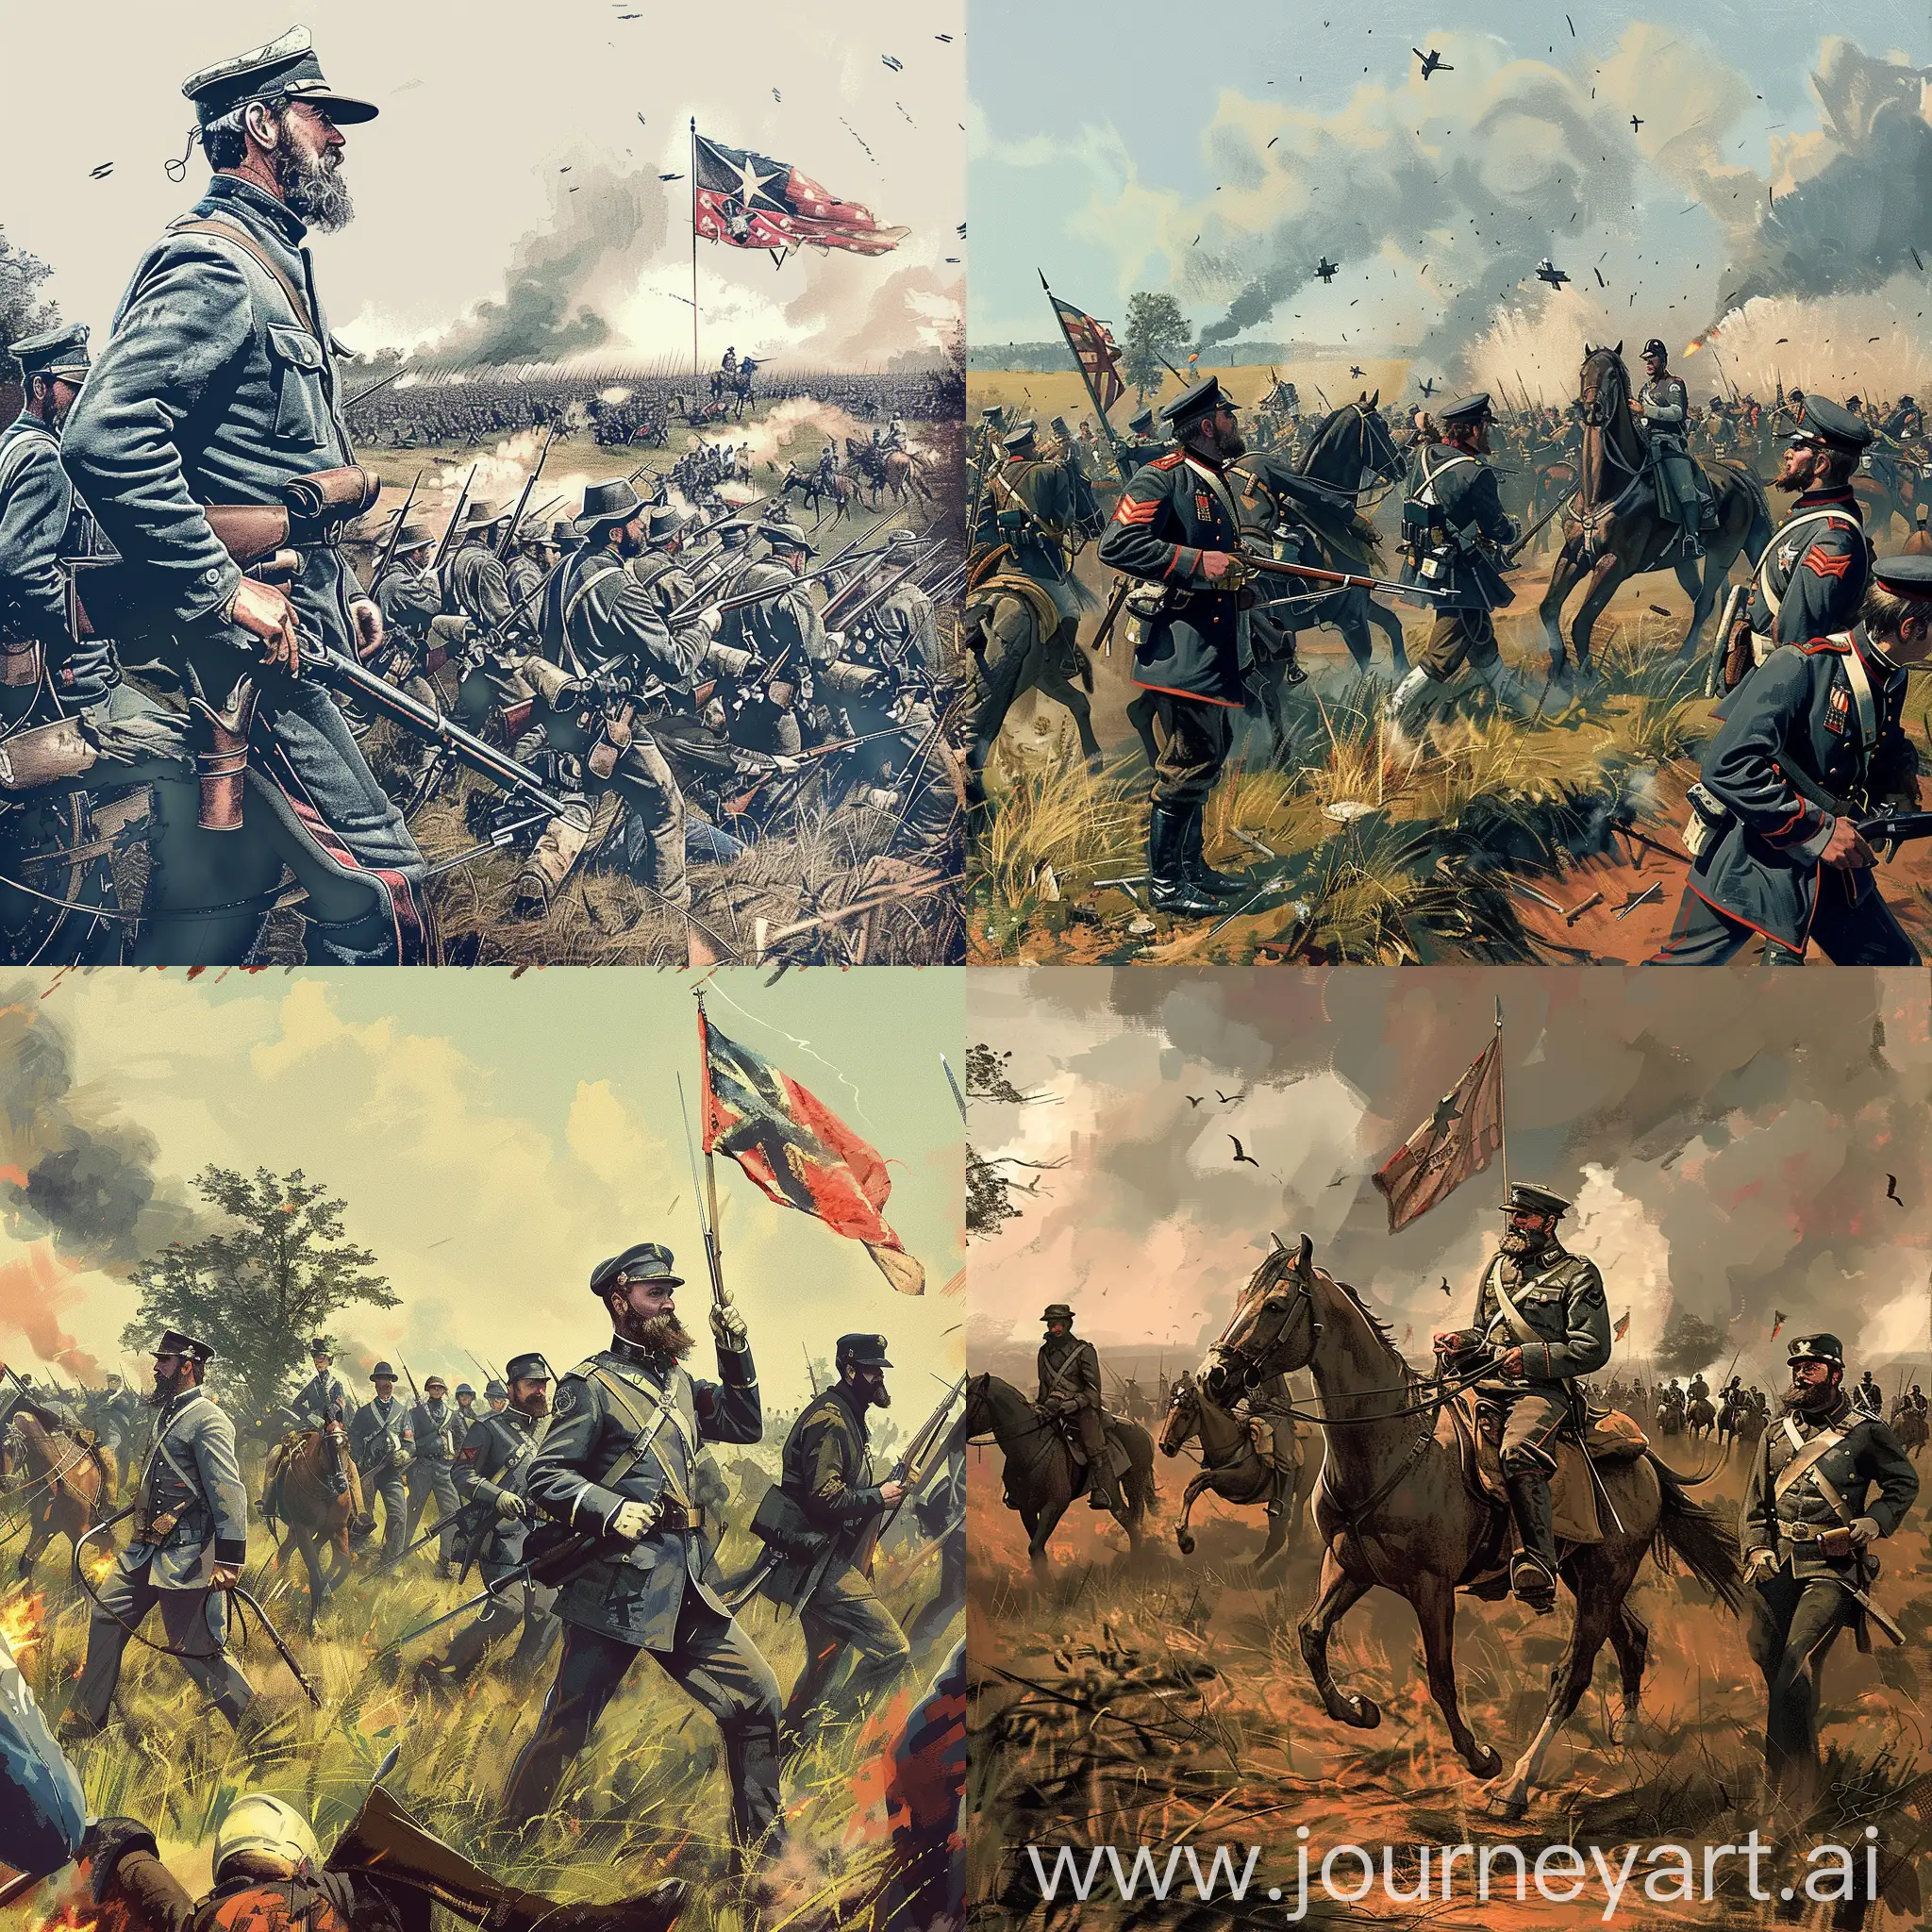 American-Civil-War-Battle-of-Chancellorsville-Historical-Accuracy-Depiction-of-Soldiers-in-Uniforms